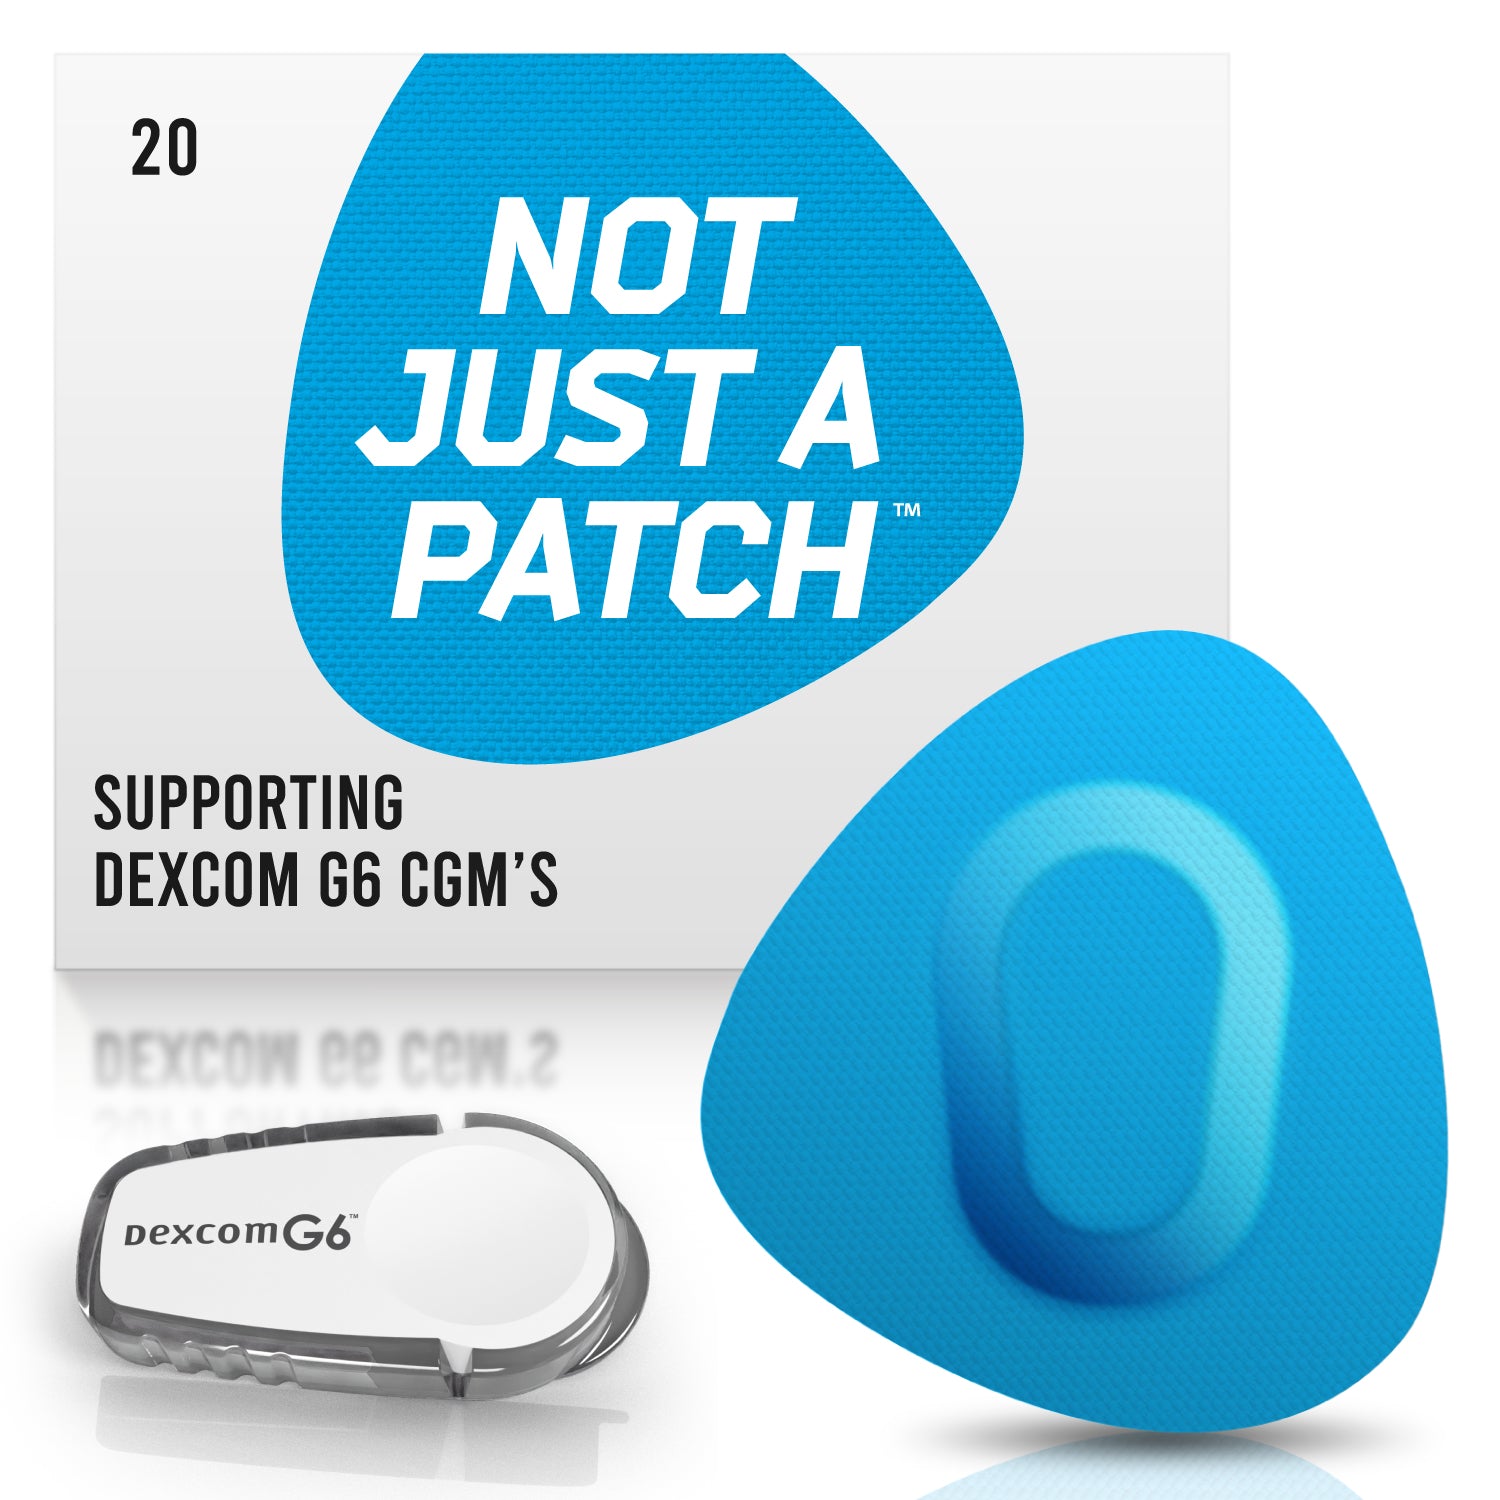 Not Just A Patch Dexcom G6 Adhesive Patches (20 Pack) - Dexcom G6 Stickers  Adhesive Patches for Skin - Water Resistant Dexcom Overpatch G6 for Active